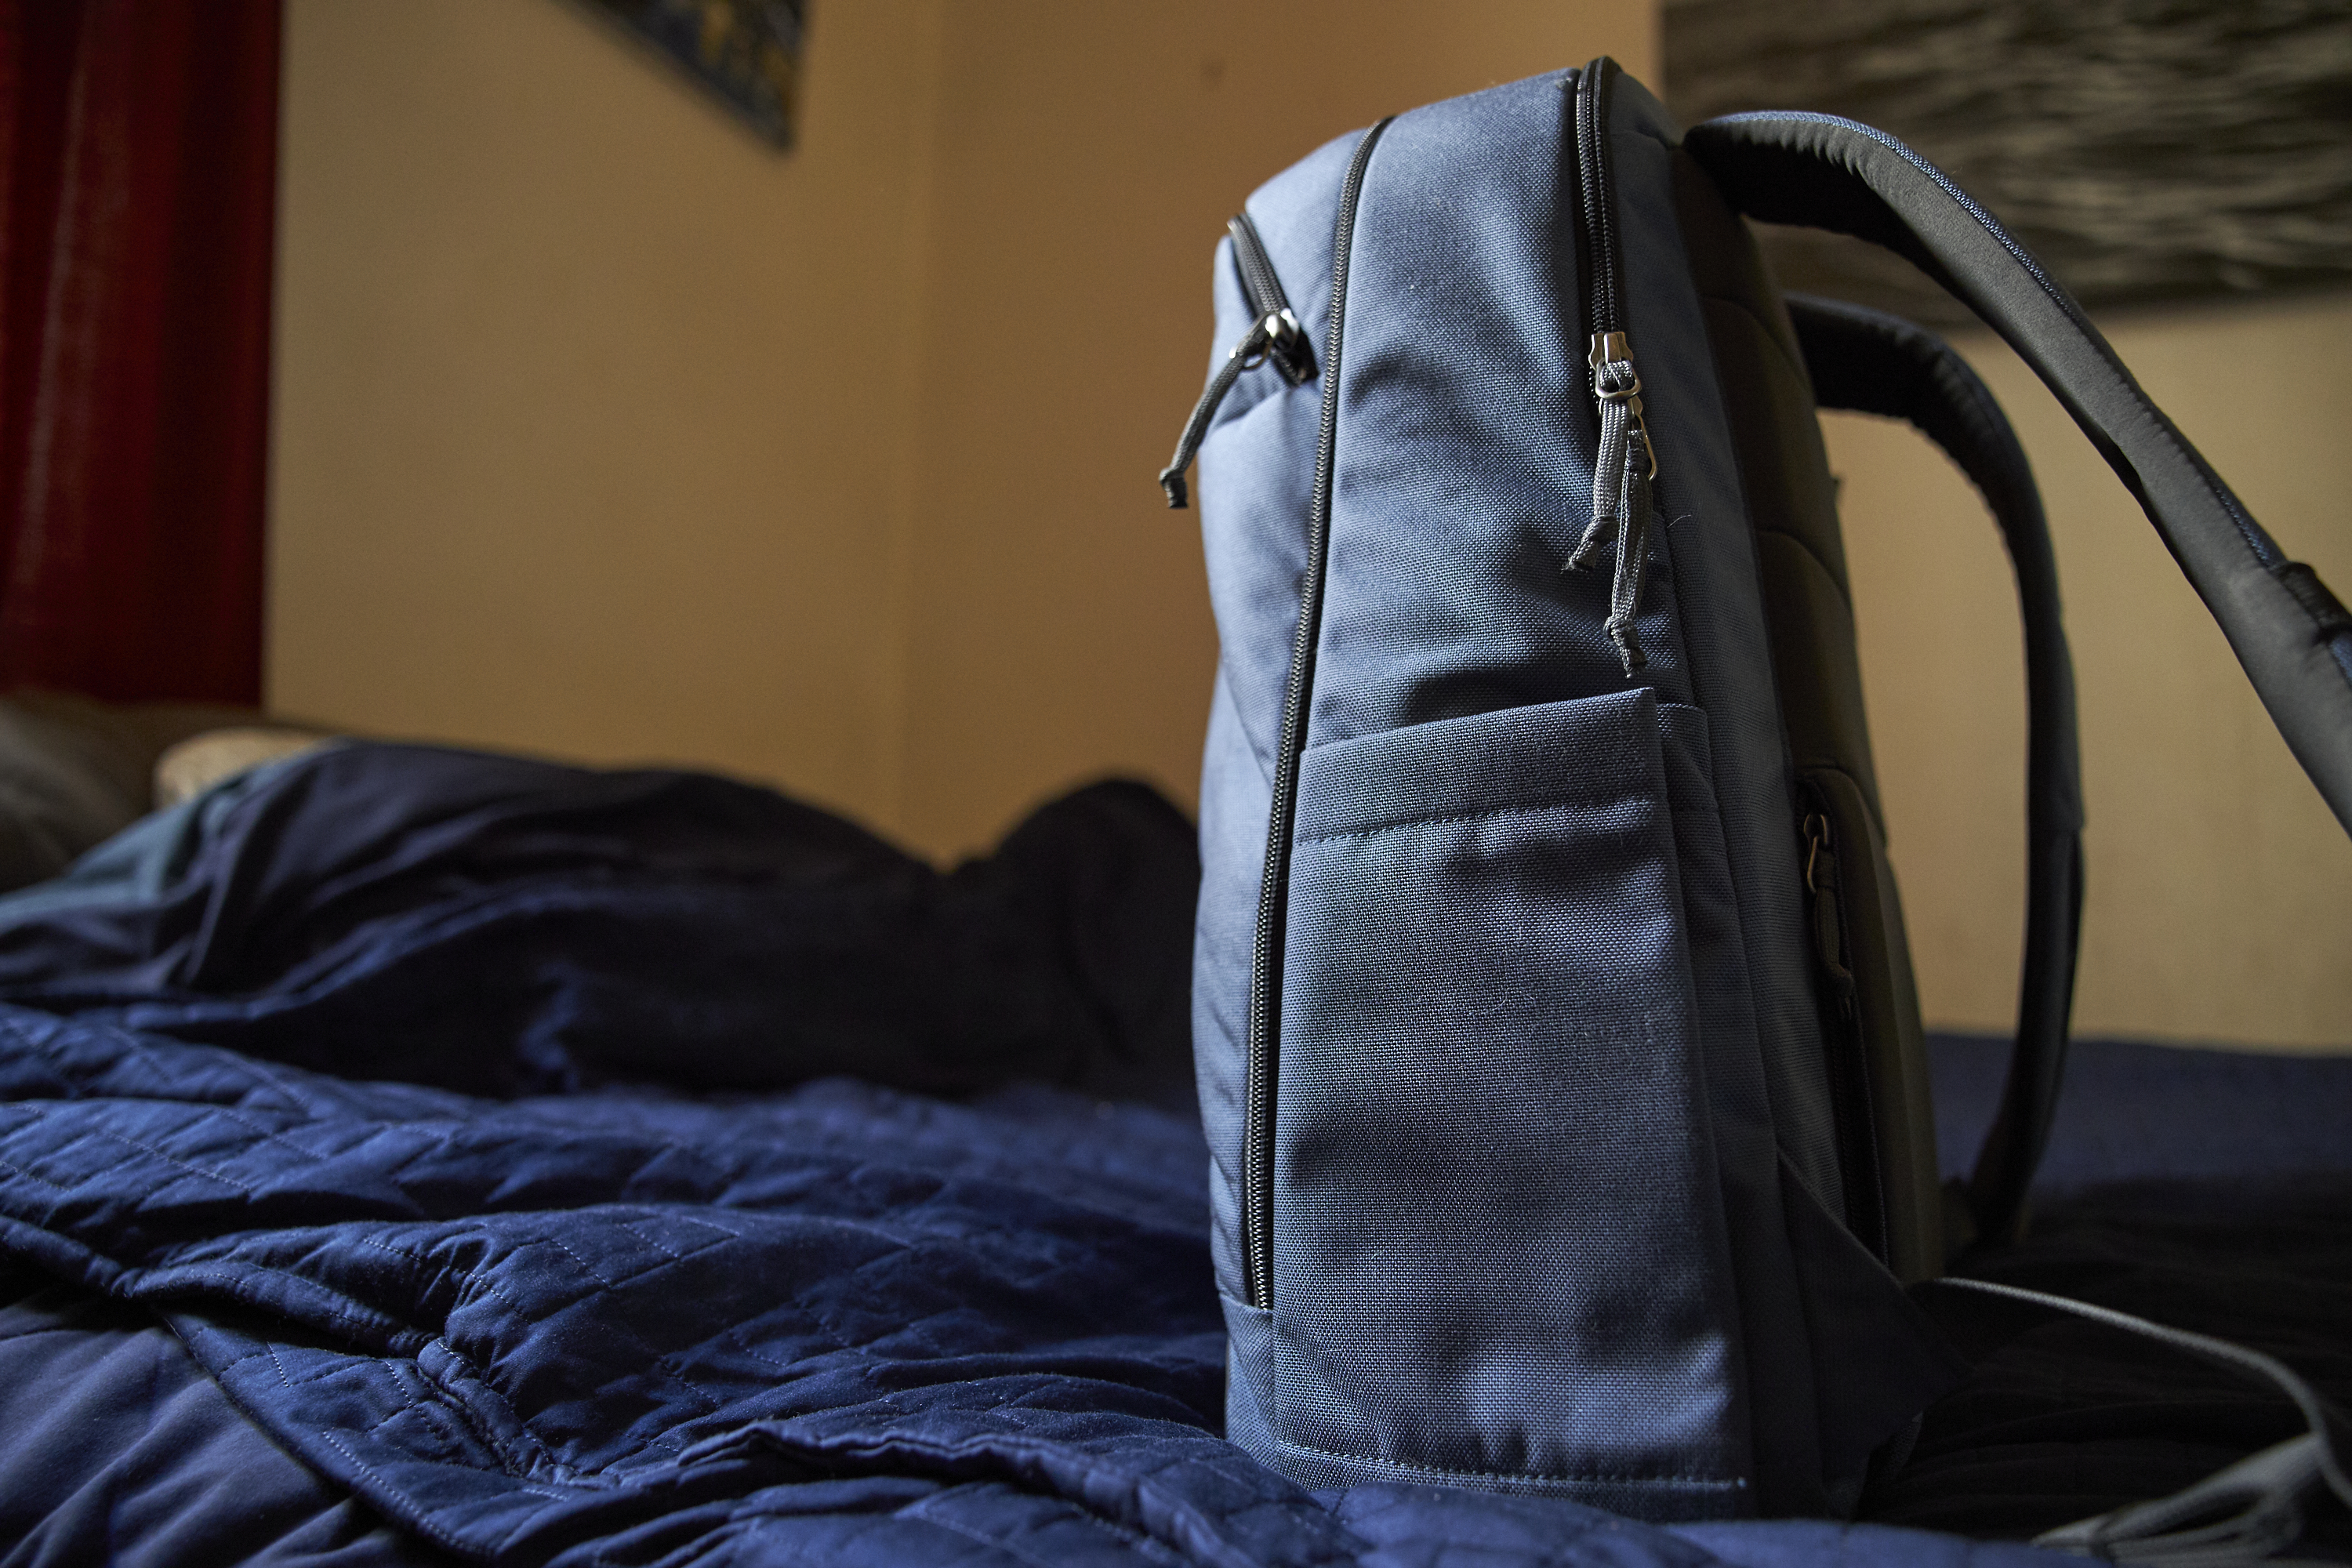 https://www.thephoblographer.com/wp-content/uploads/2019/10/Chris-Gampat-The-Phoblographer-Yeti-Crossroads-Backpack-23-review-product-Images-2.81-50s1600-6.jpg